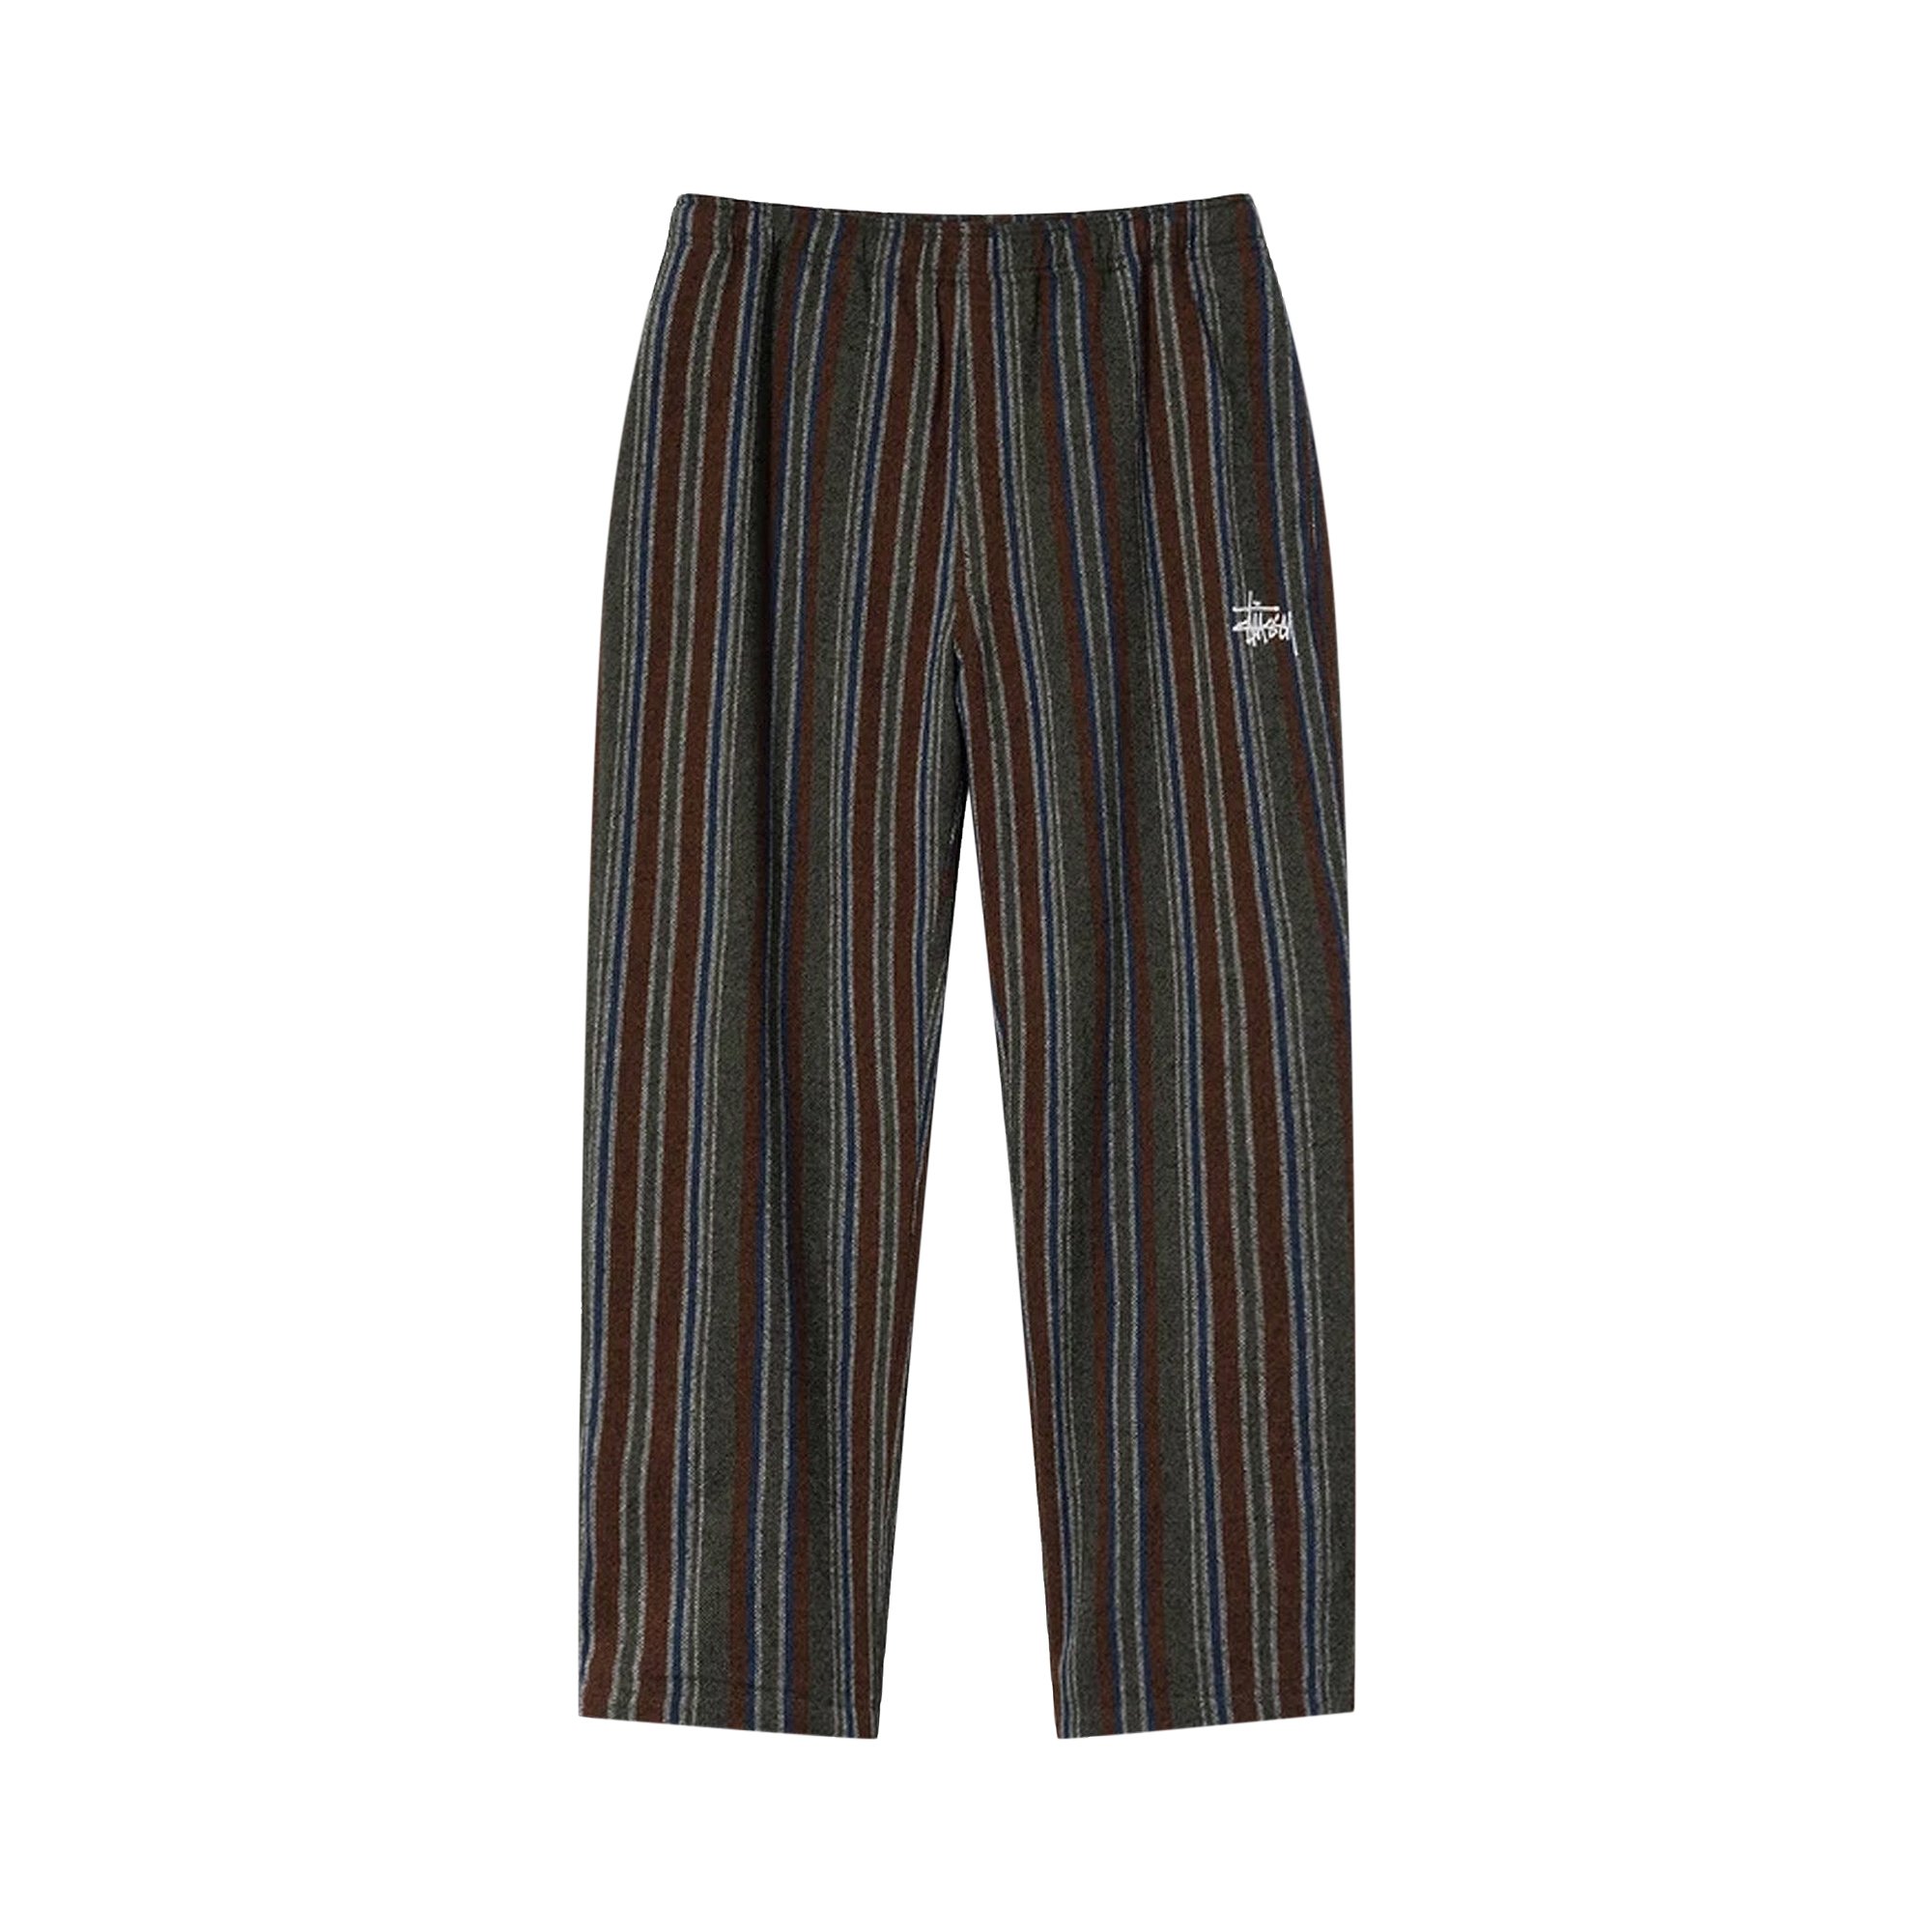 Buy Stussy Wool Stripe Relaxed Pant 'Olive' - 116510 OLIV | GOAT